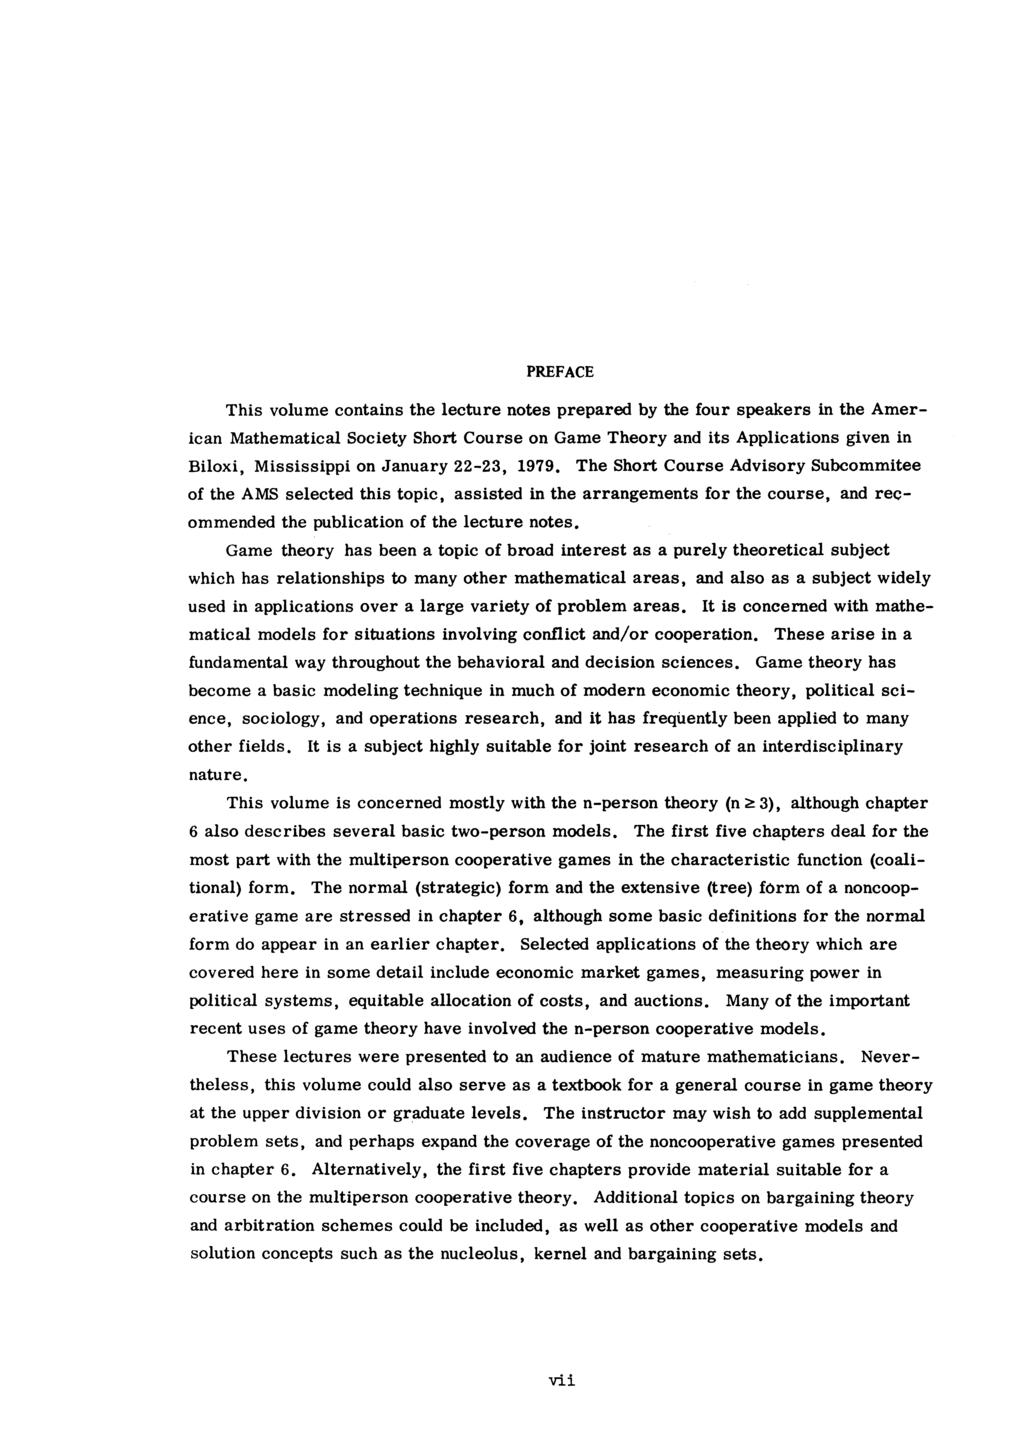 PREFACE This volume contains the lecture notes prepared by the four speakers in the American Mathematical Society Short Course on Game Theory and its Applications given in Biloxi, Mississippi on